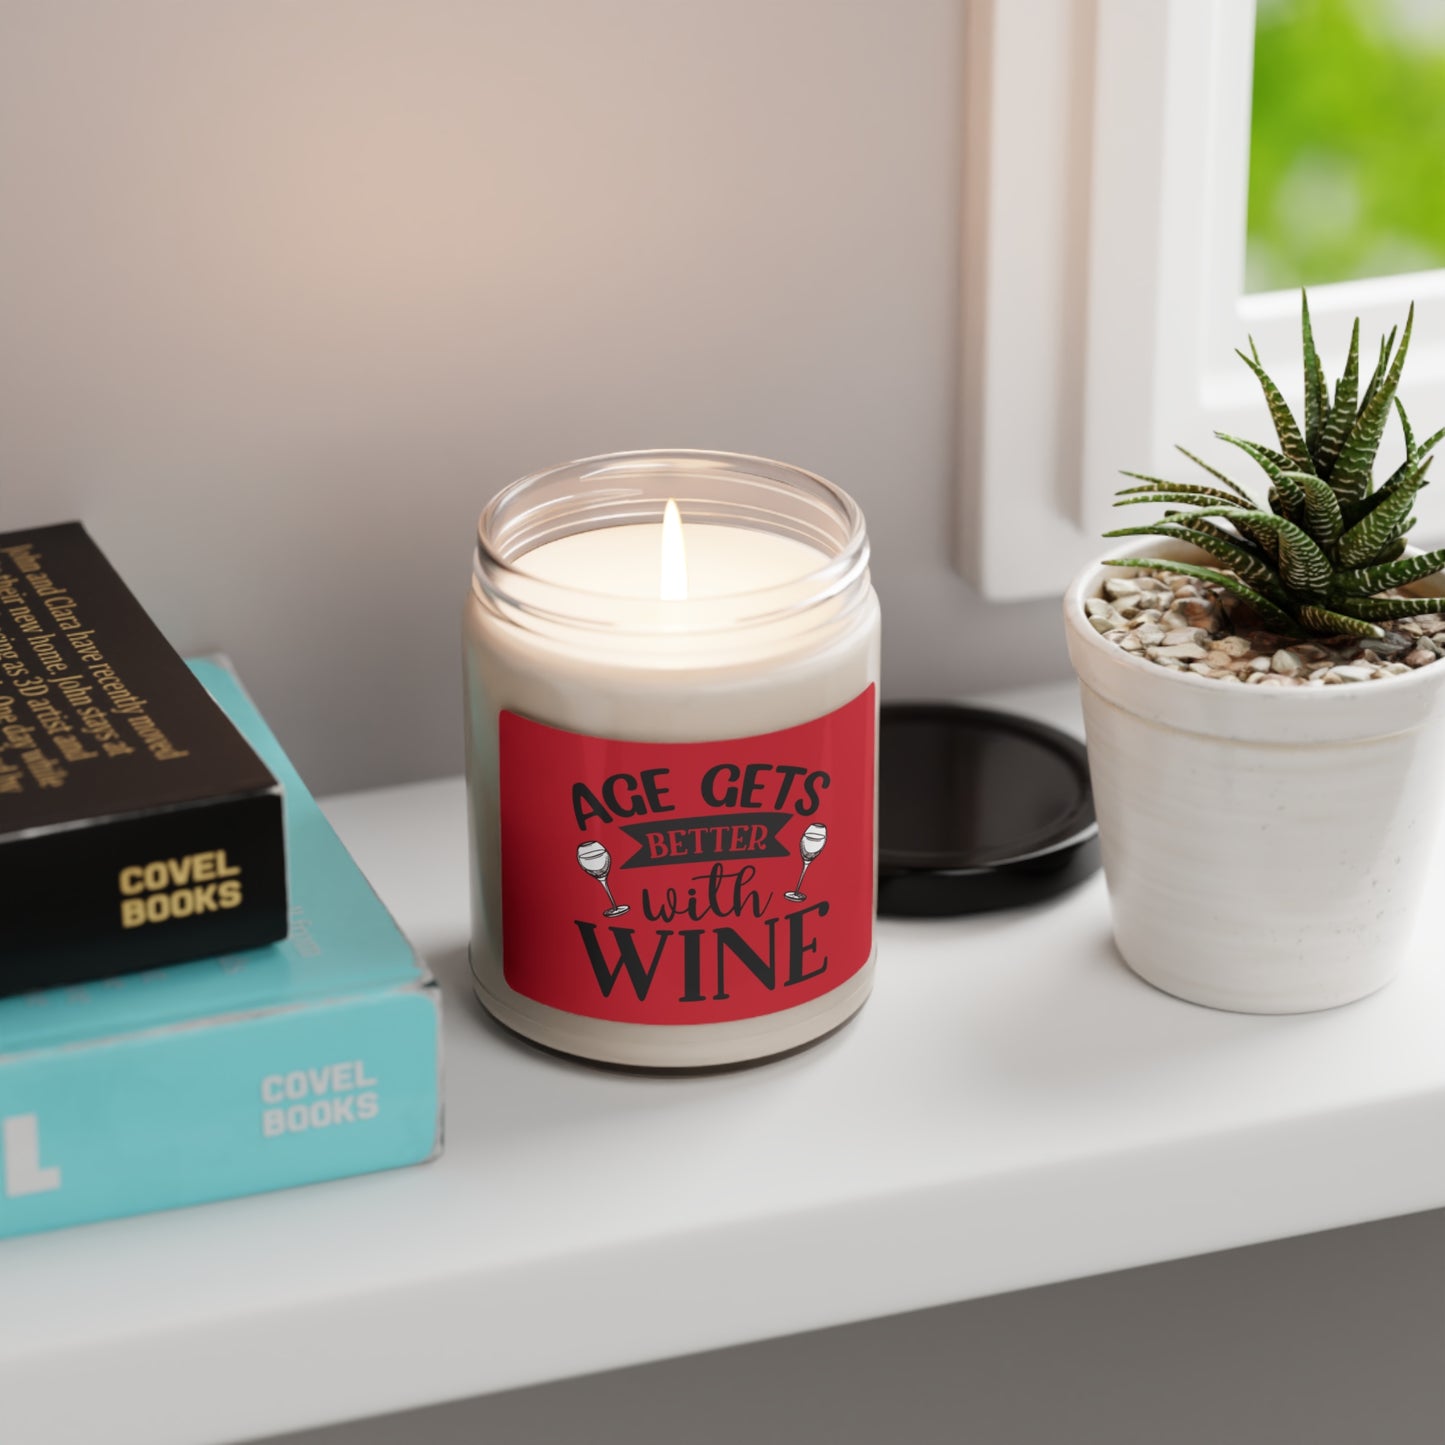 Age gets better with wine Scented Soy Candle, 9oz